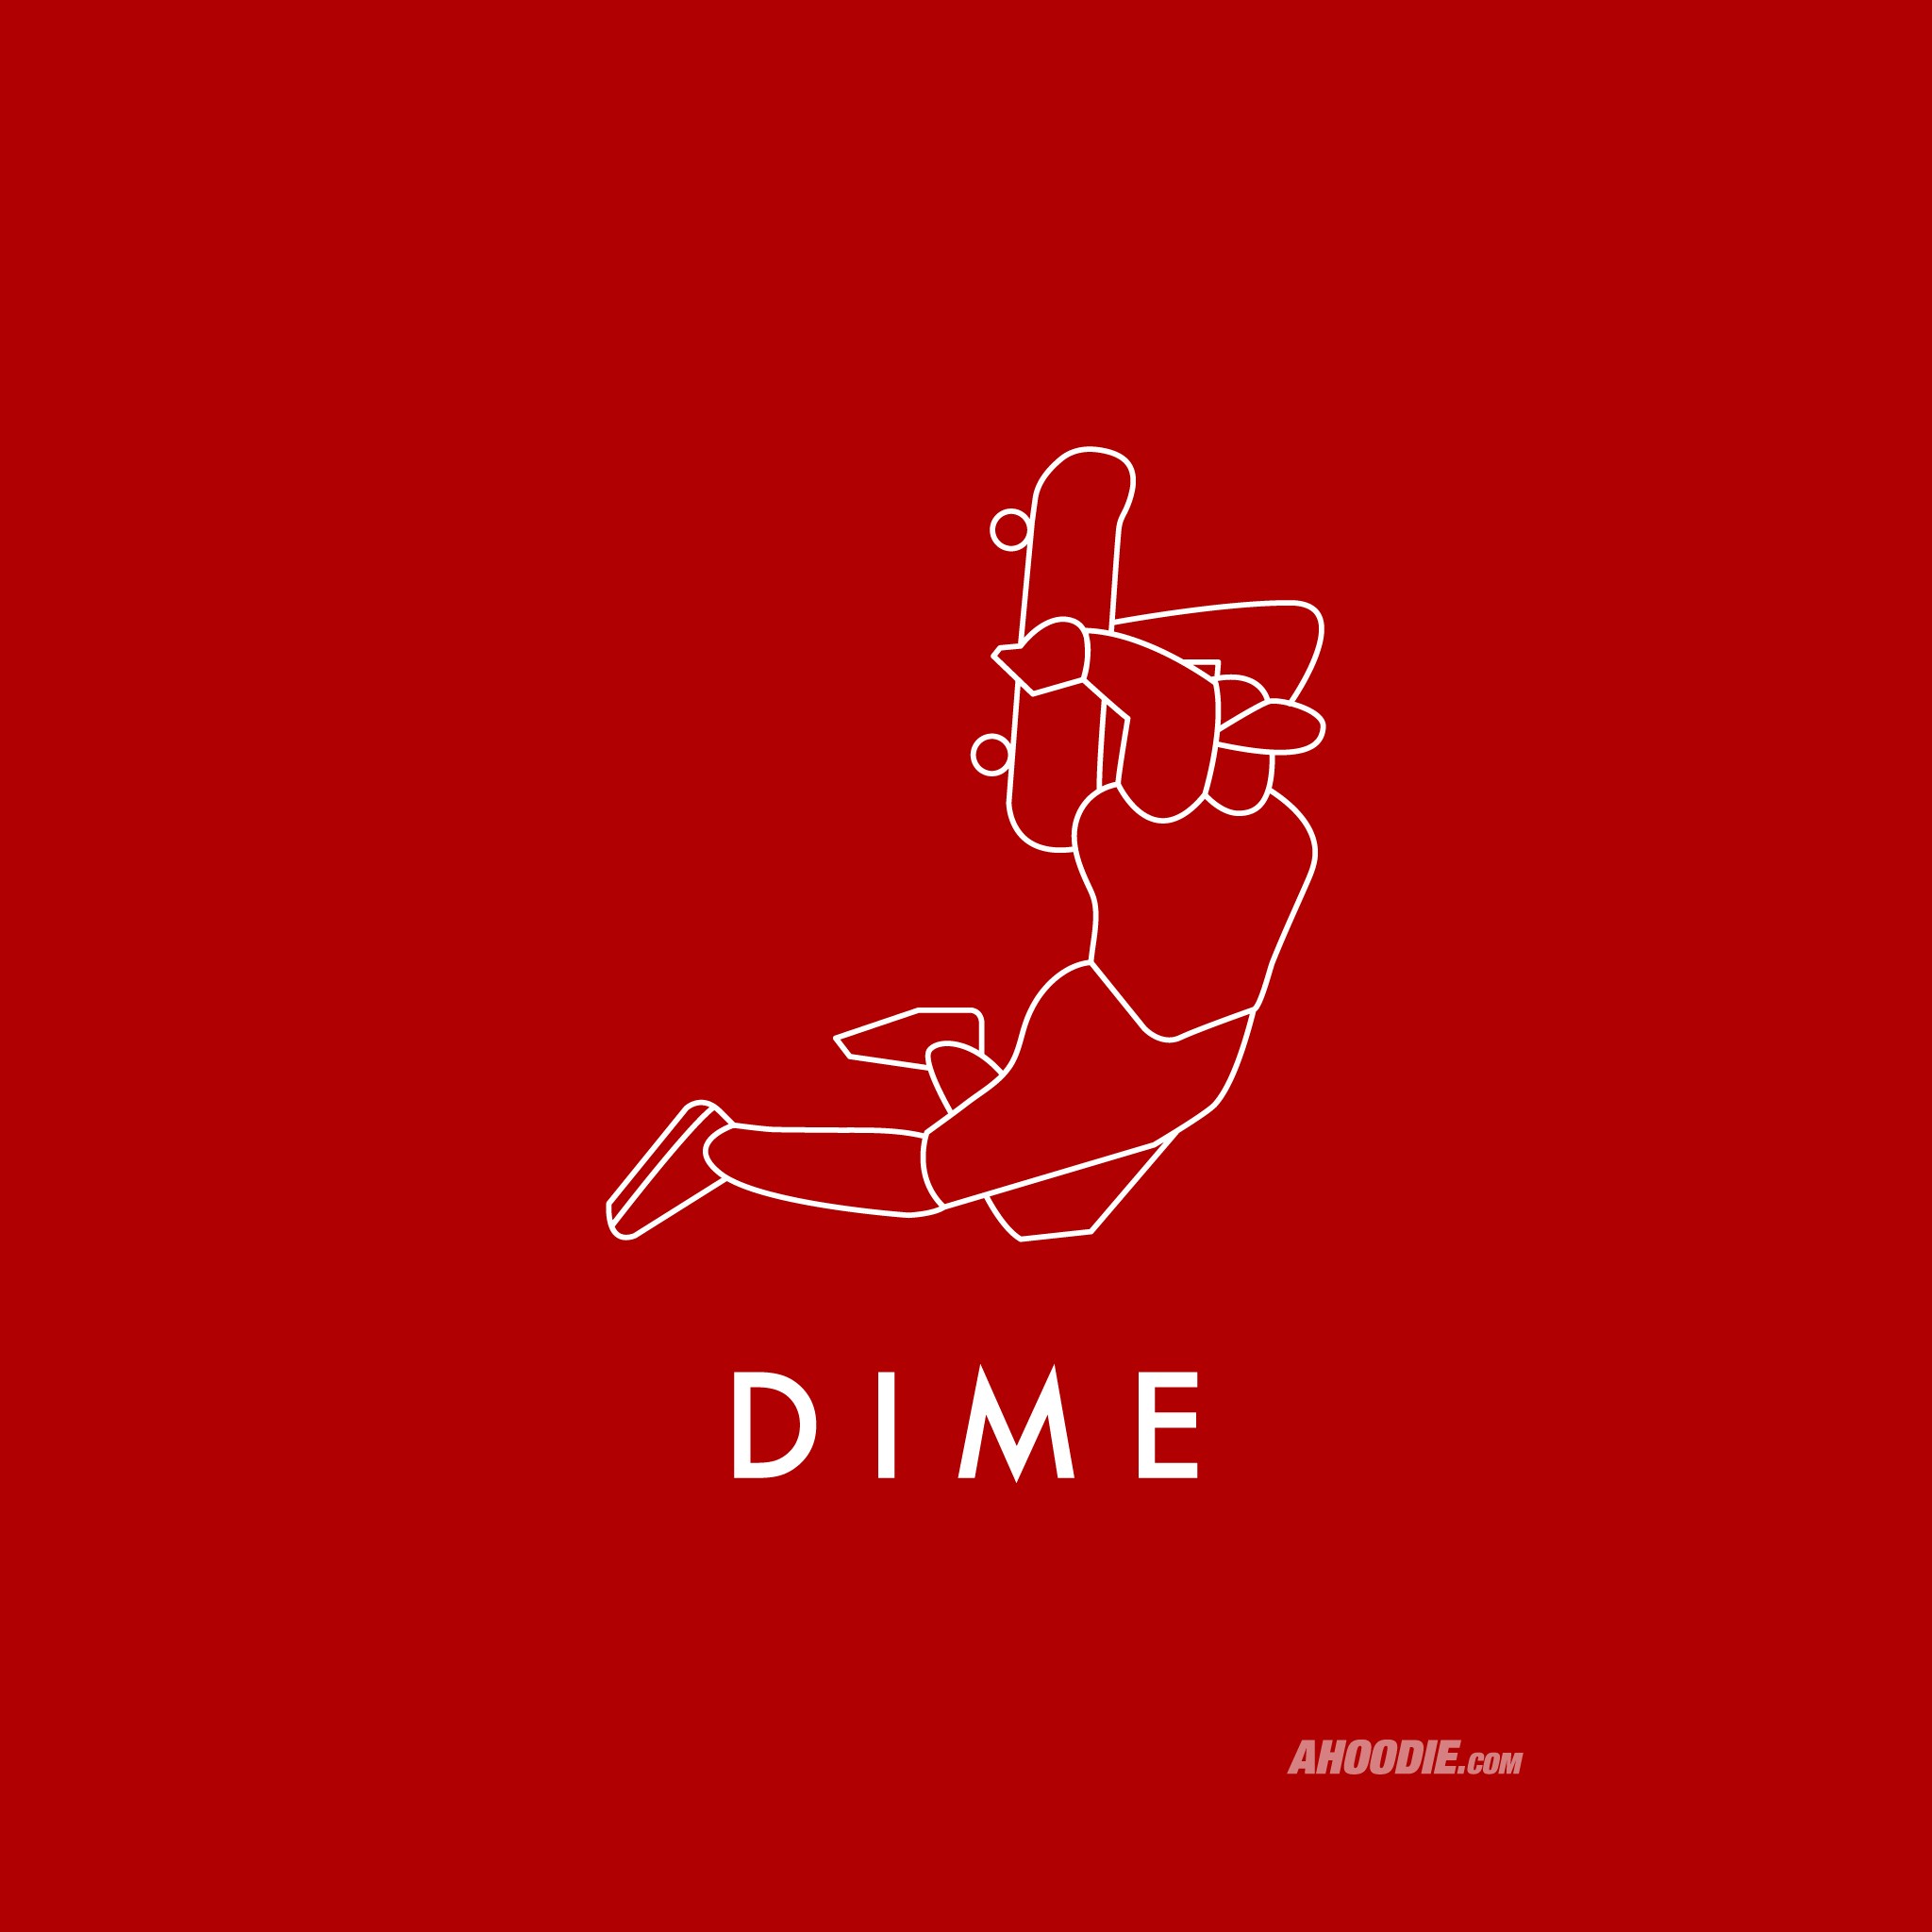 Dime "Dunk" Wallpapers 